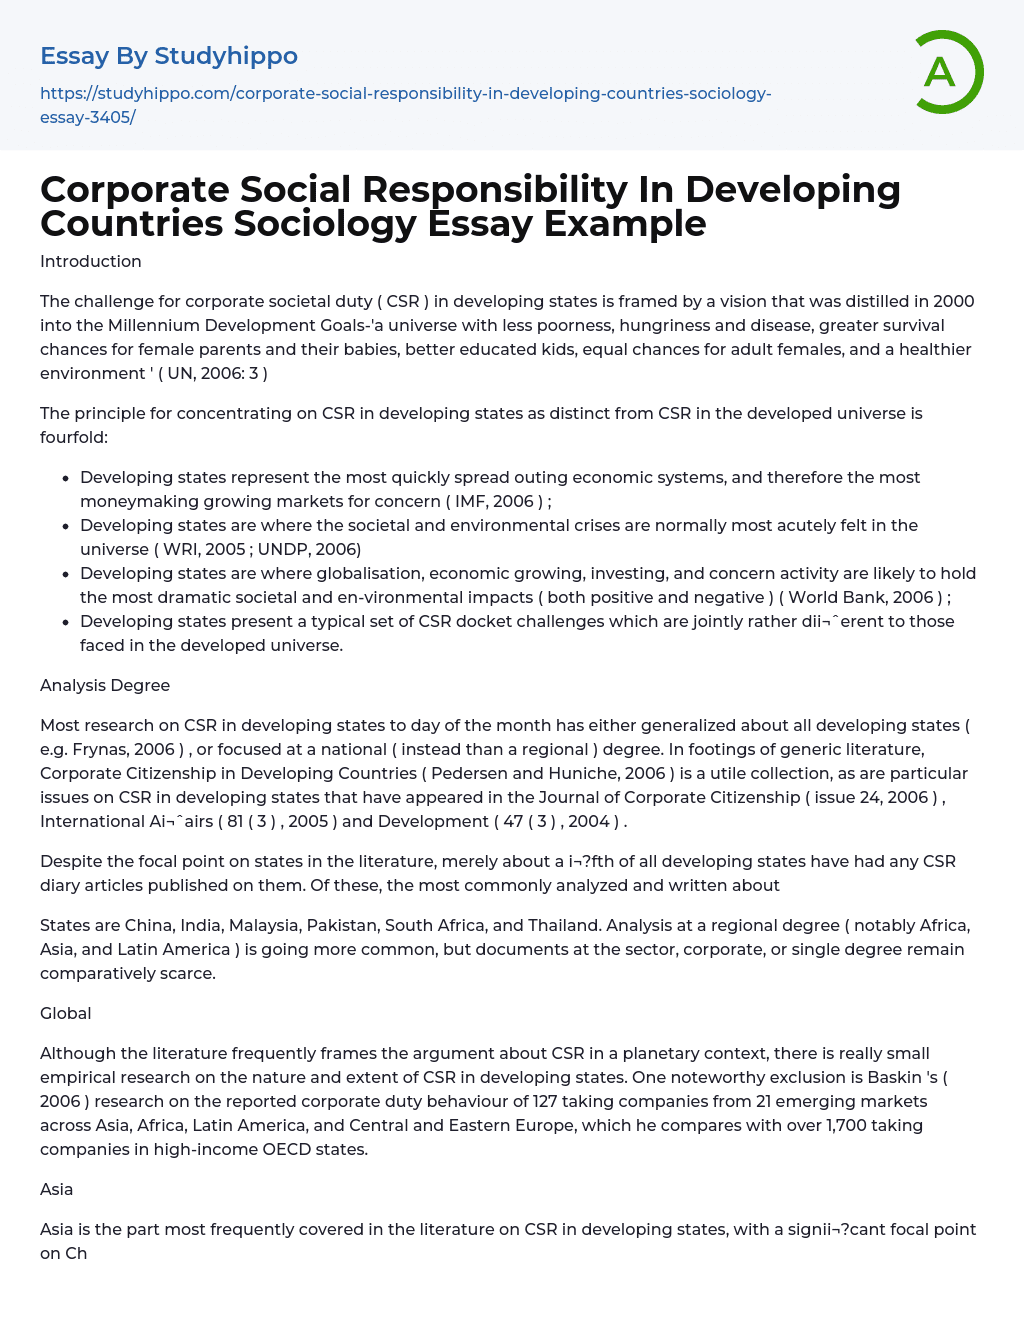 Corporate Social Responsibility In Developing Countries Sociology Essay Example